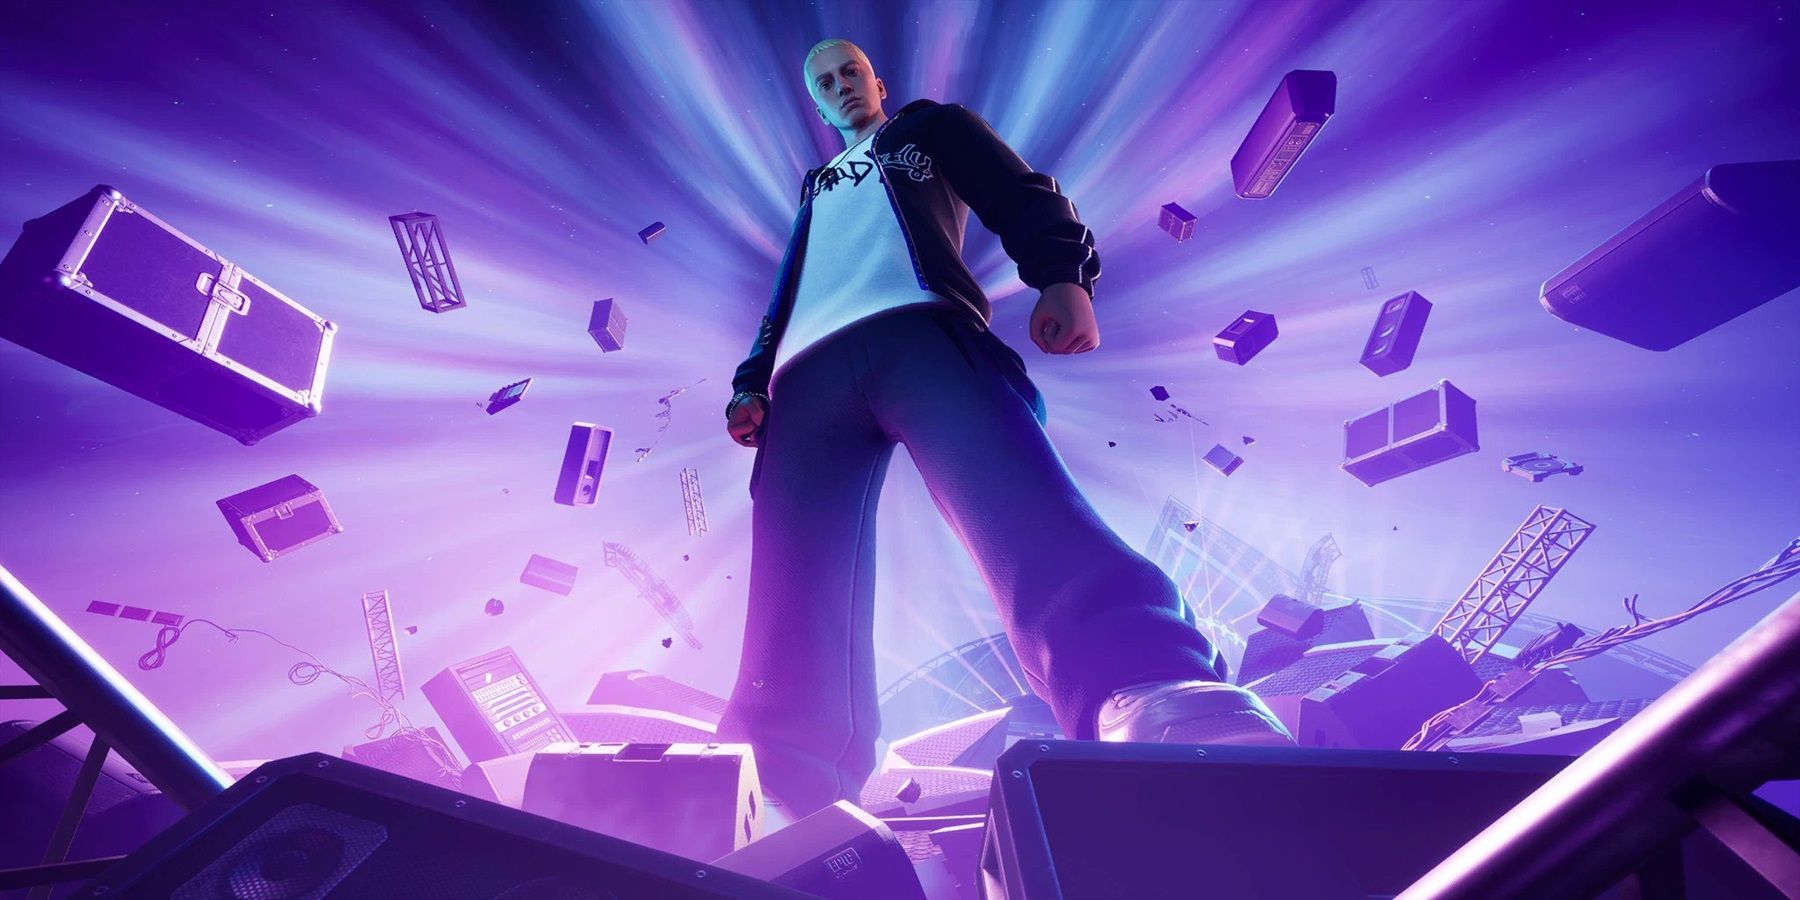 epic-confirms-eminem-is-coming-to-fortnite-1